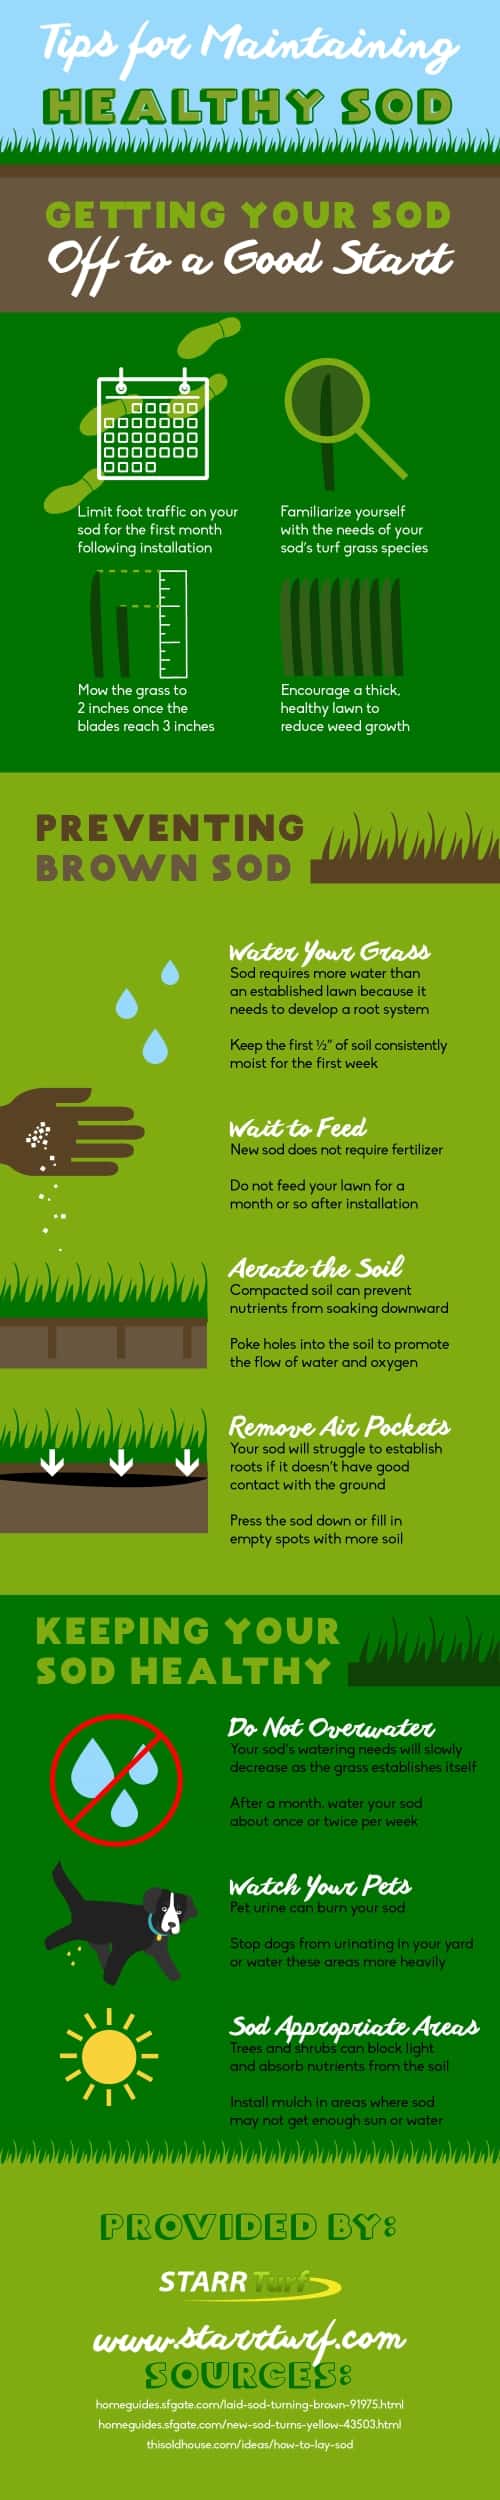 Tips for Maintaining Healthy Sod by Starr Turf Grass Inc.